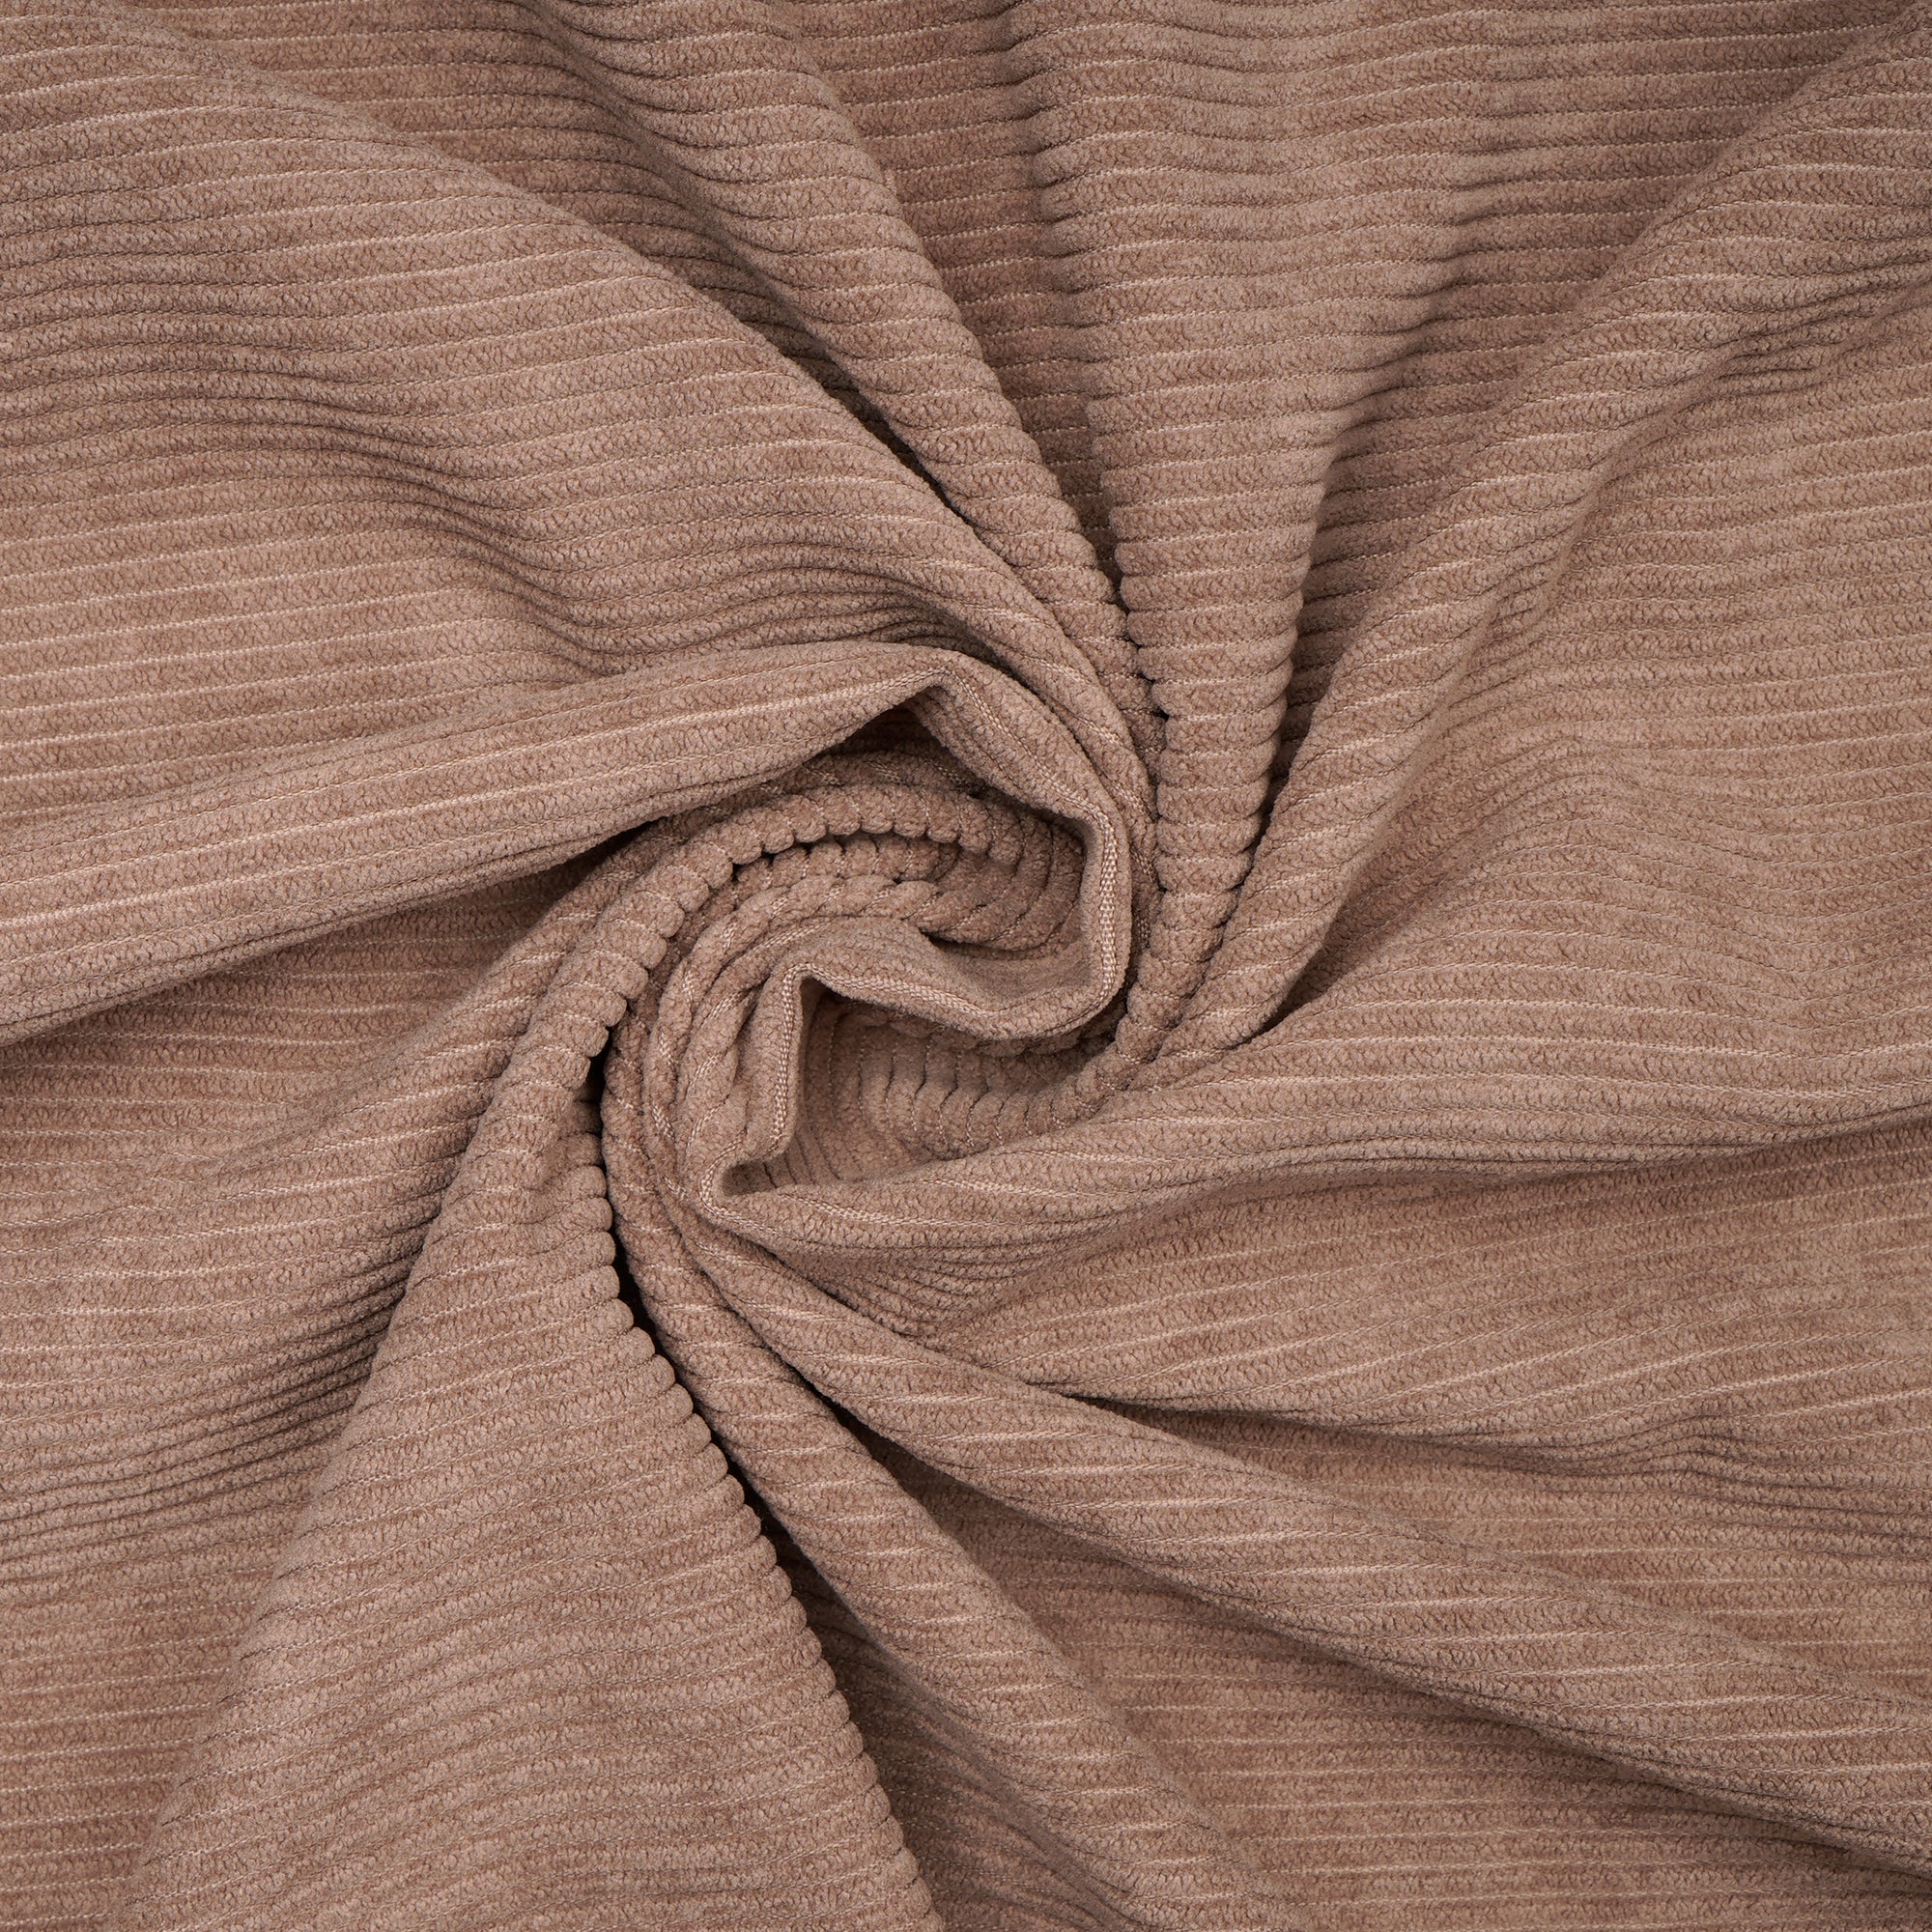 Warm Taupe Imported Cotton Corduroy Fabric (60" Wide)